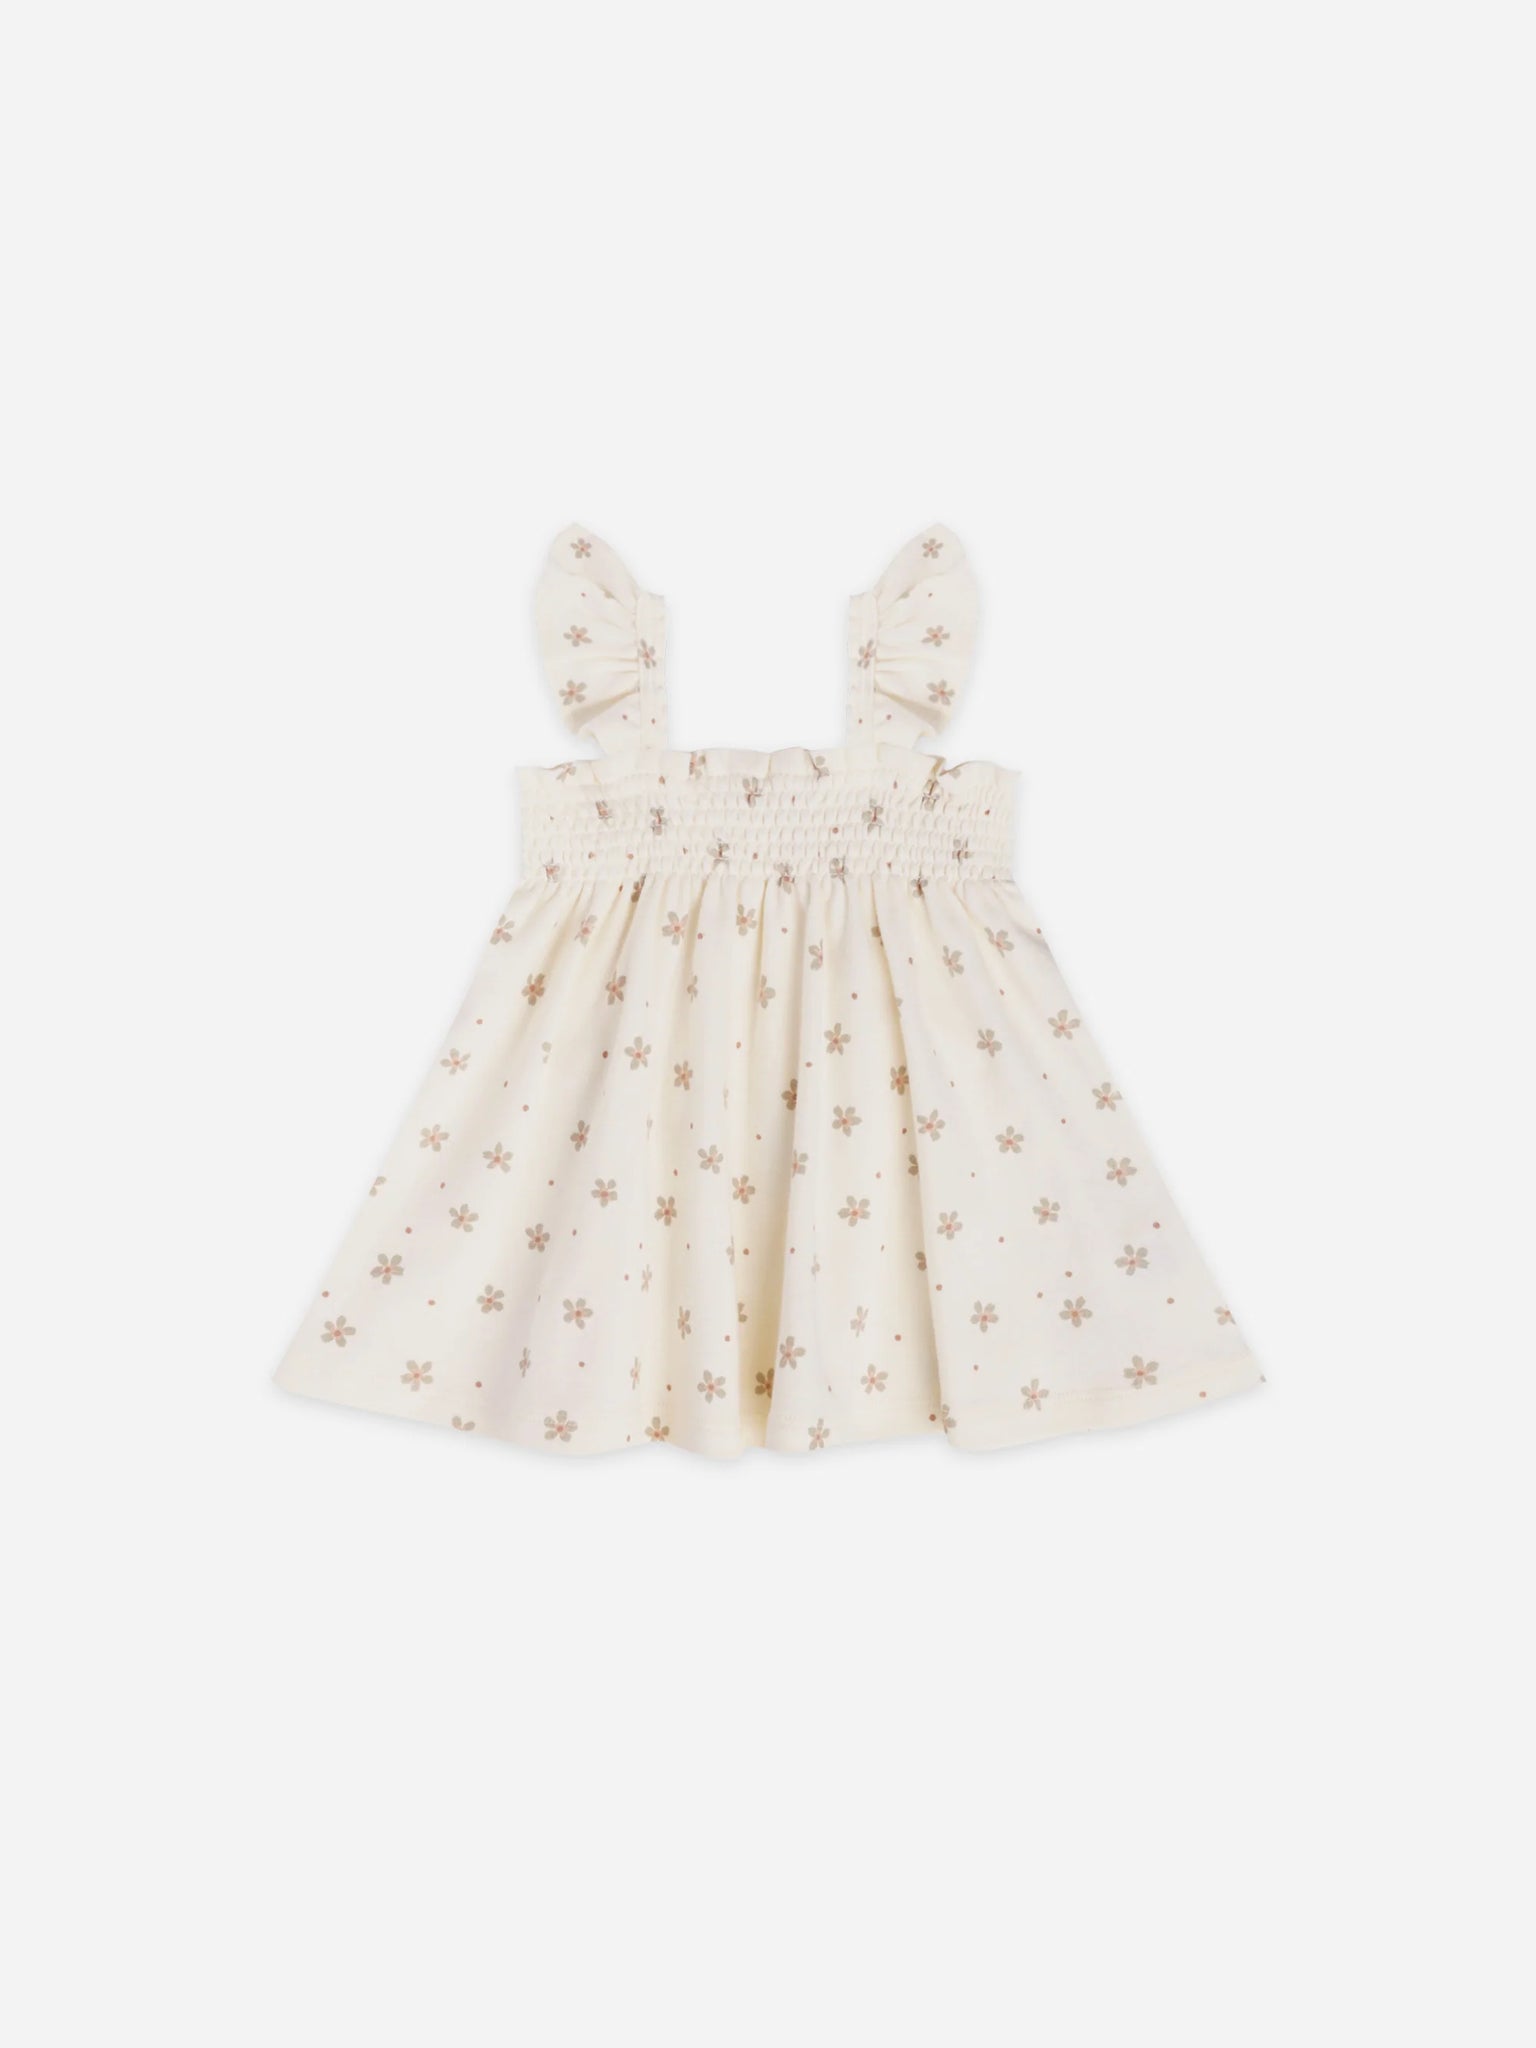 *Quincy Mae Smocked Jersey Dress